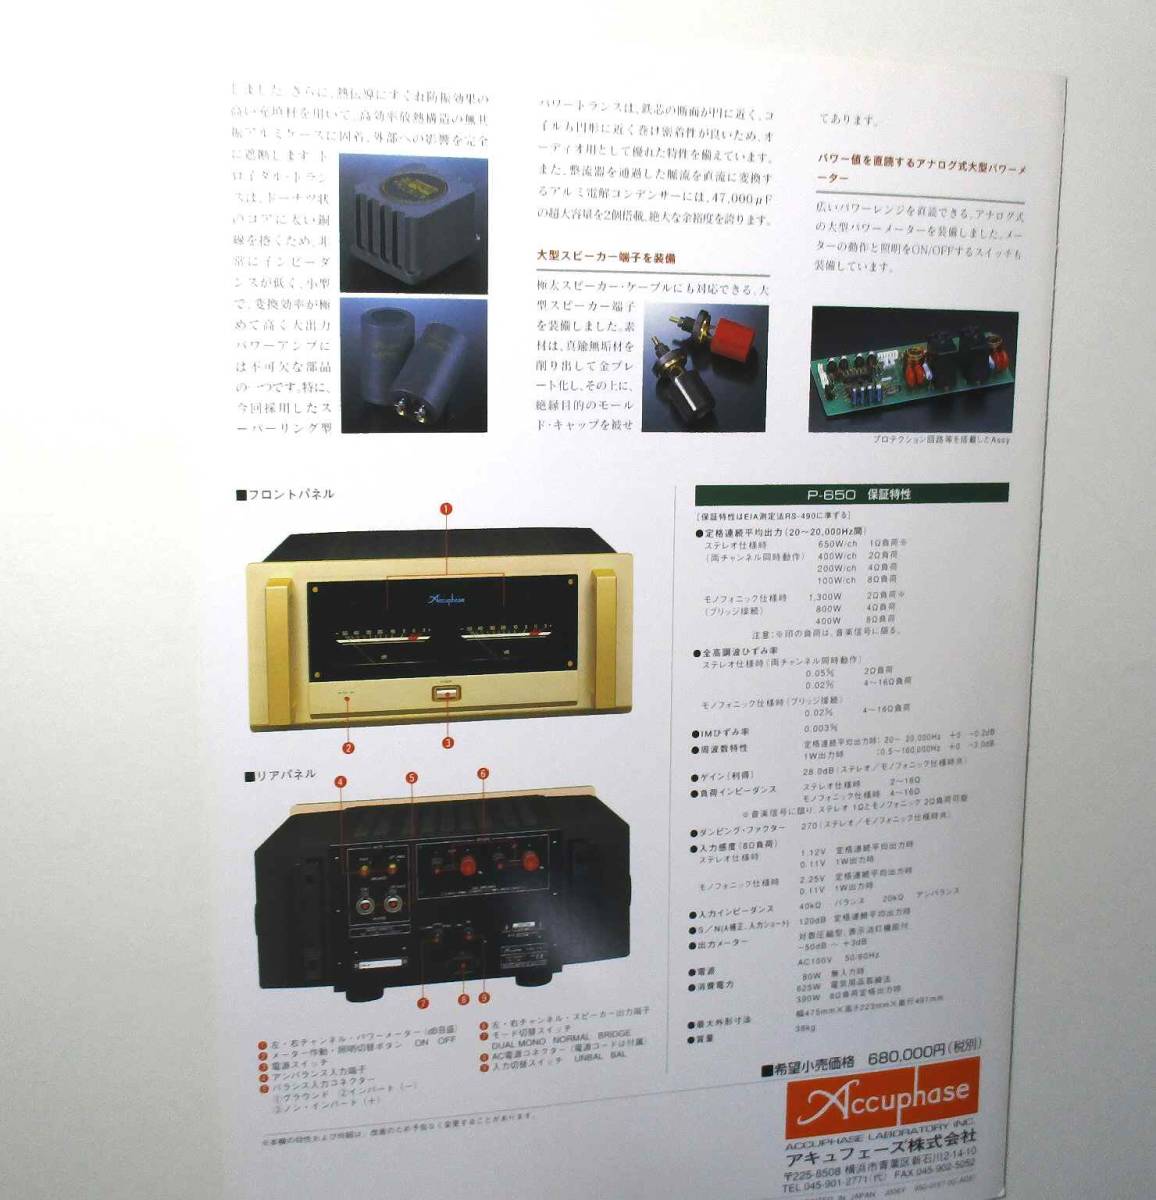 *** Accuphase P-650 < single goods catalog > 2000 year version 